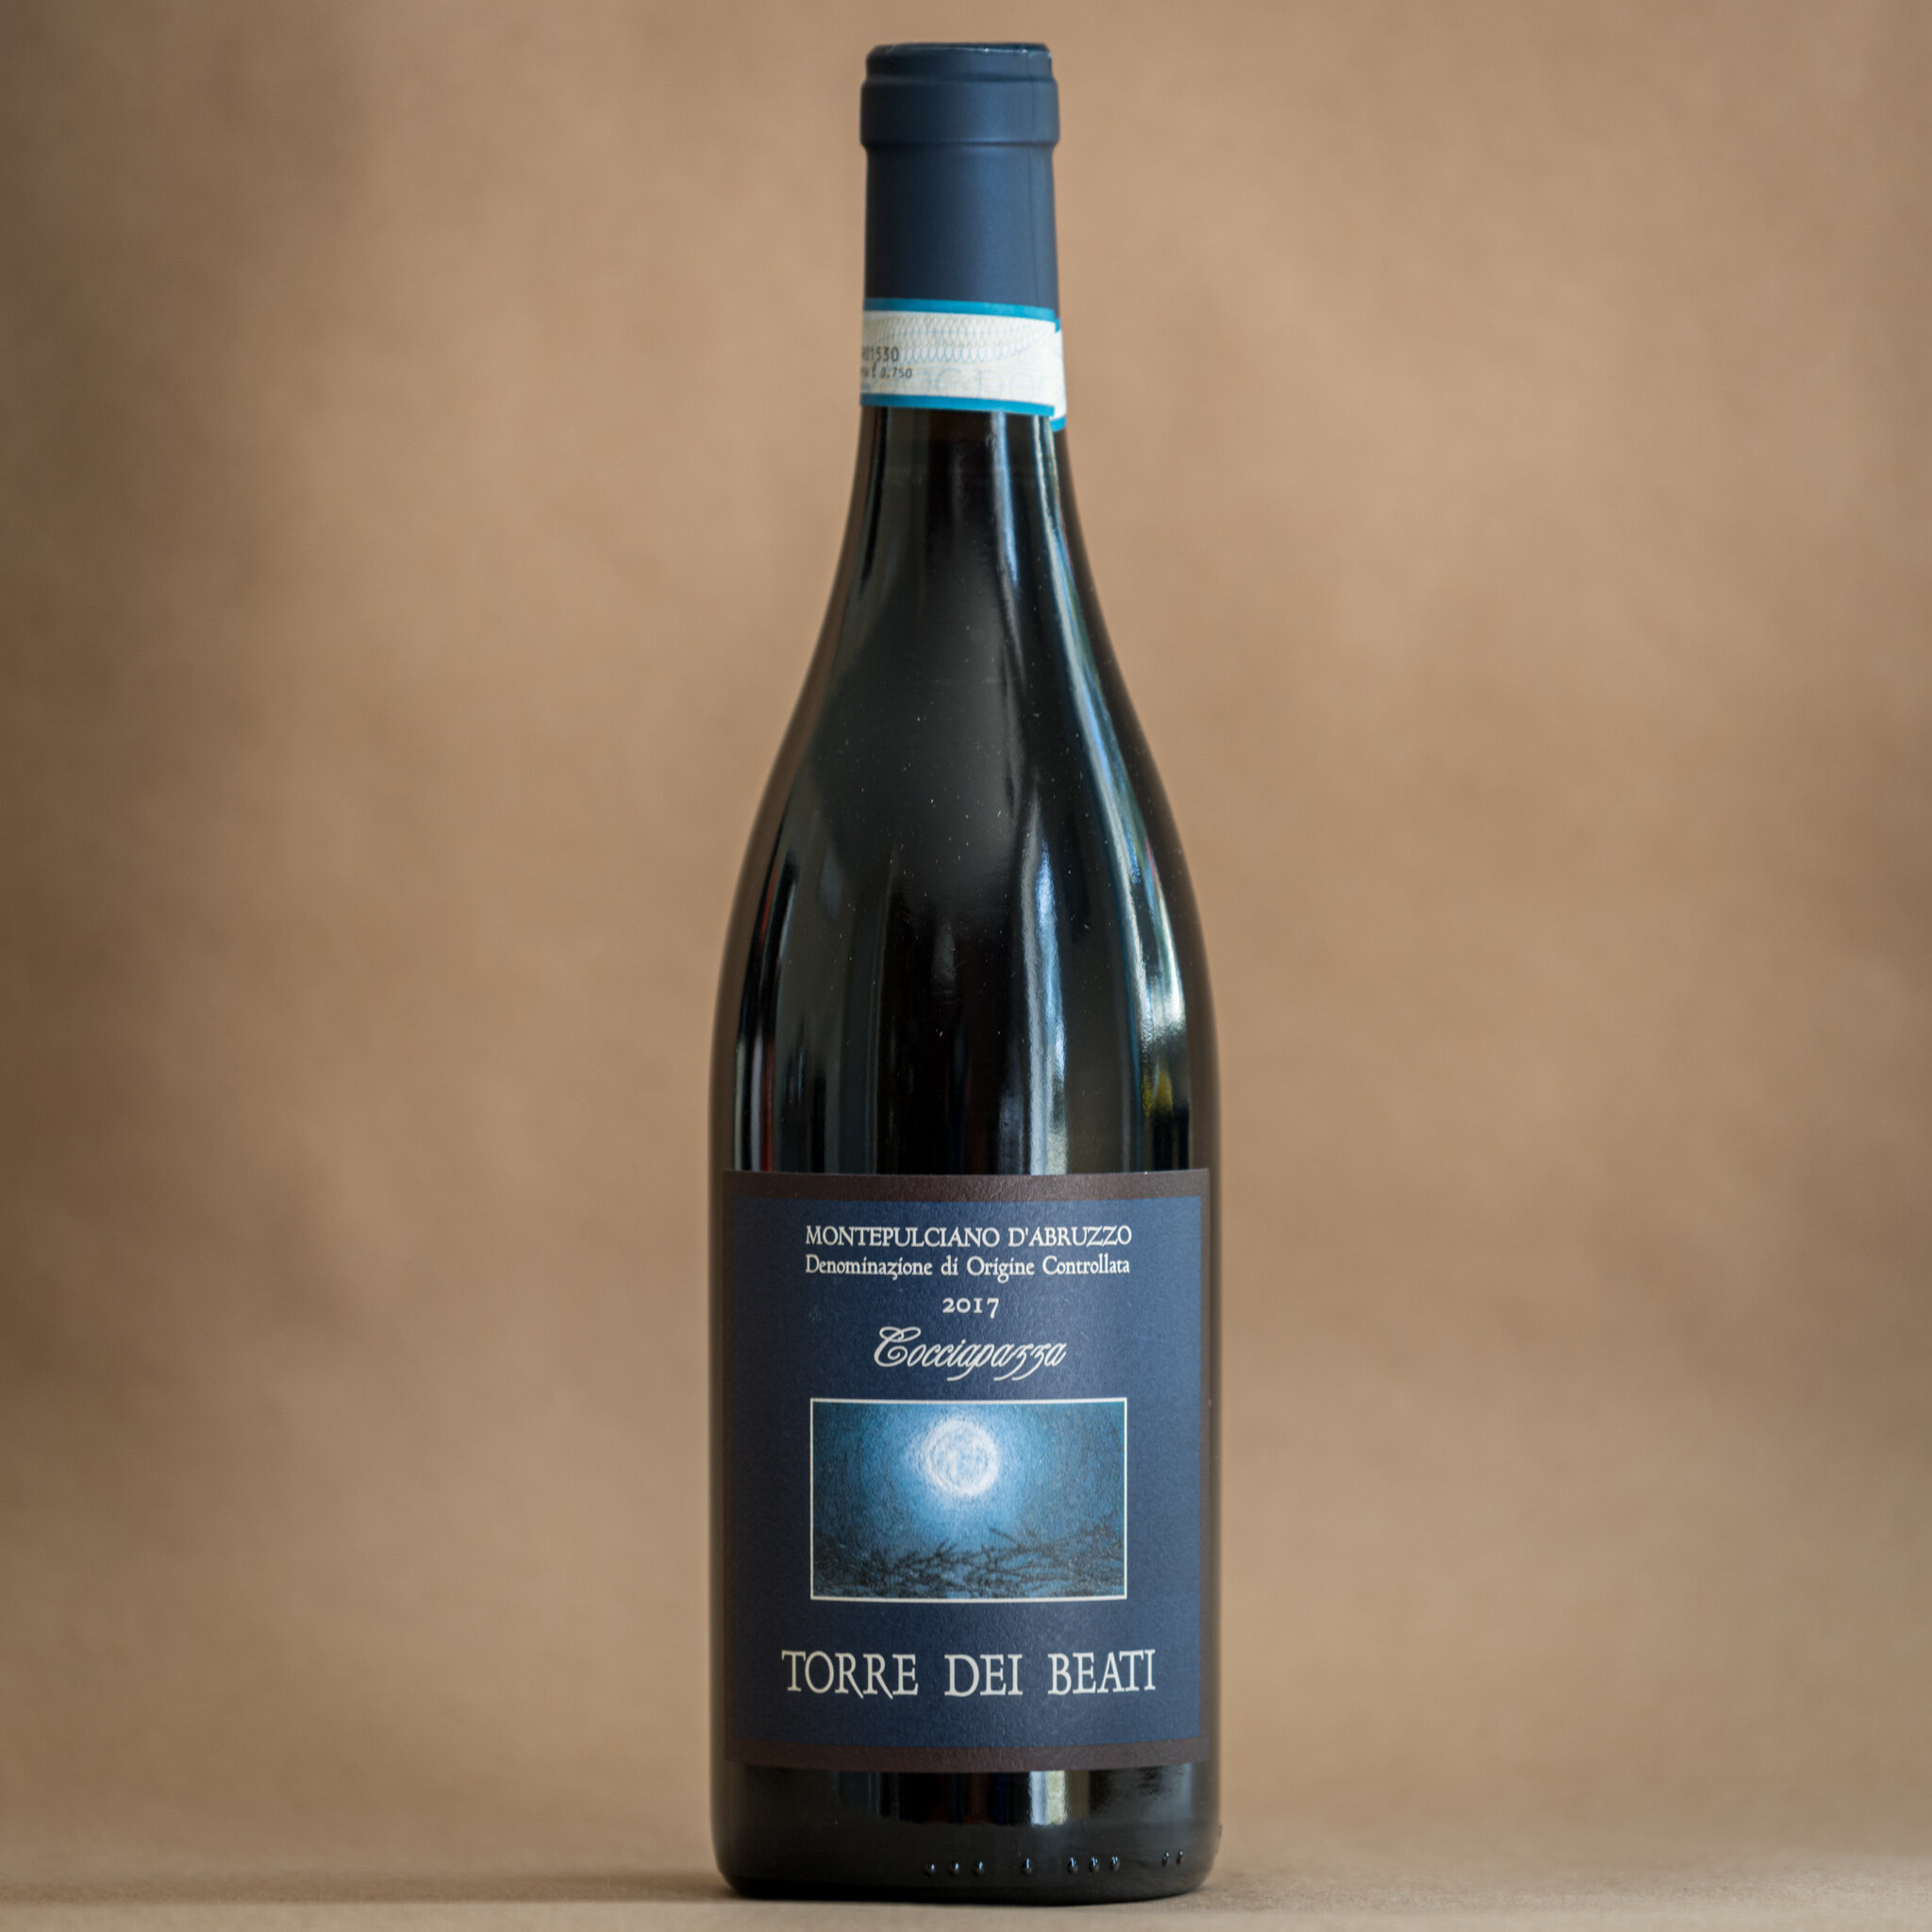 The Ultimate Pizza Wine: Montepulciano d'Abruzzo from Cantina